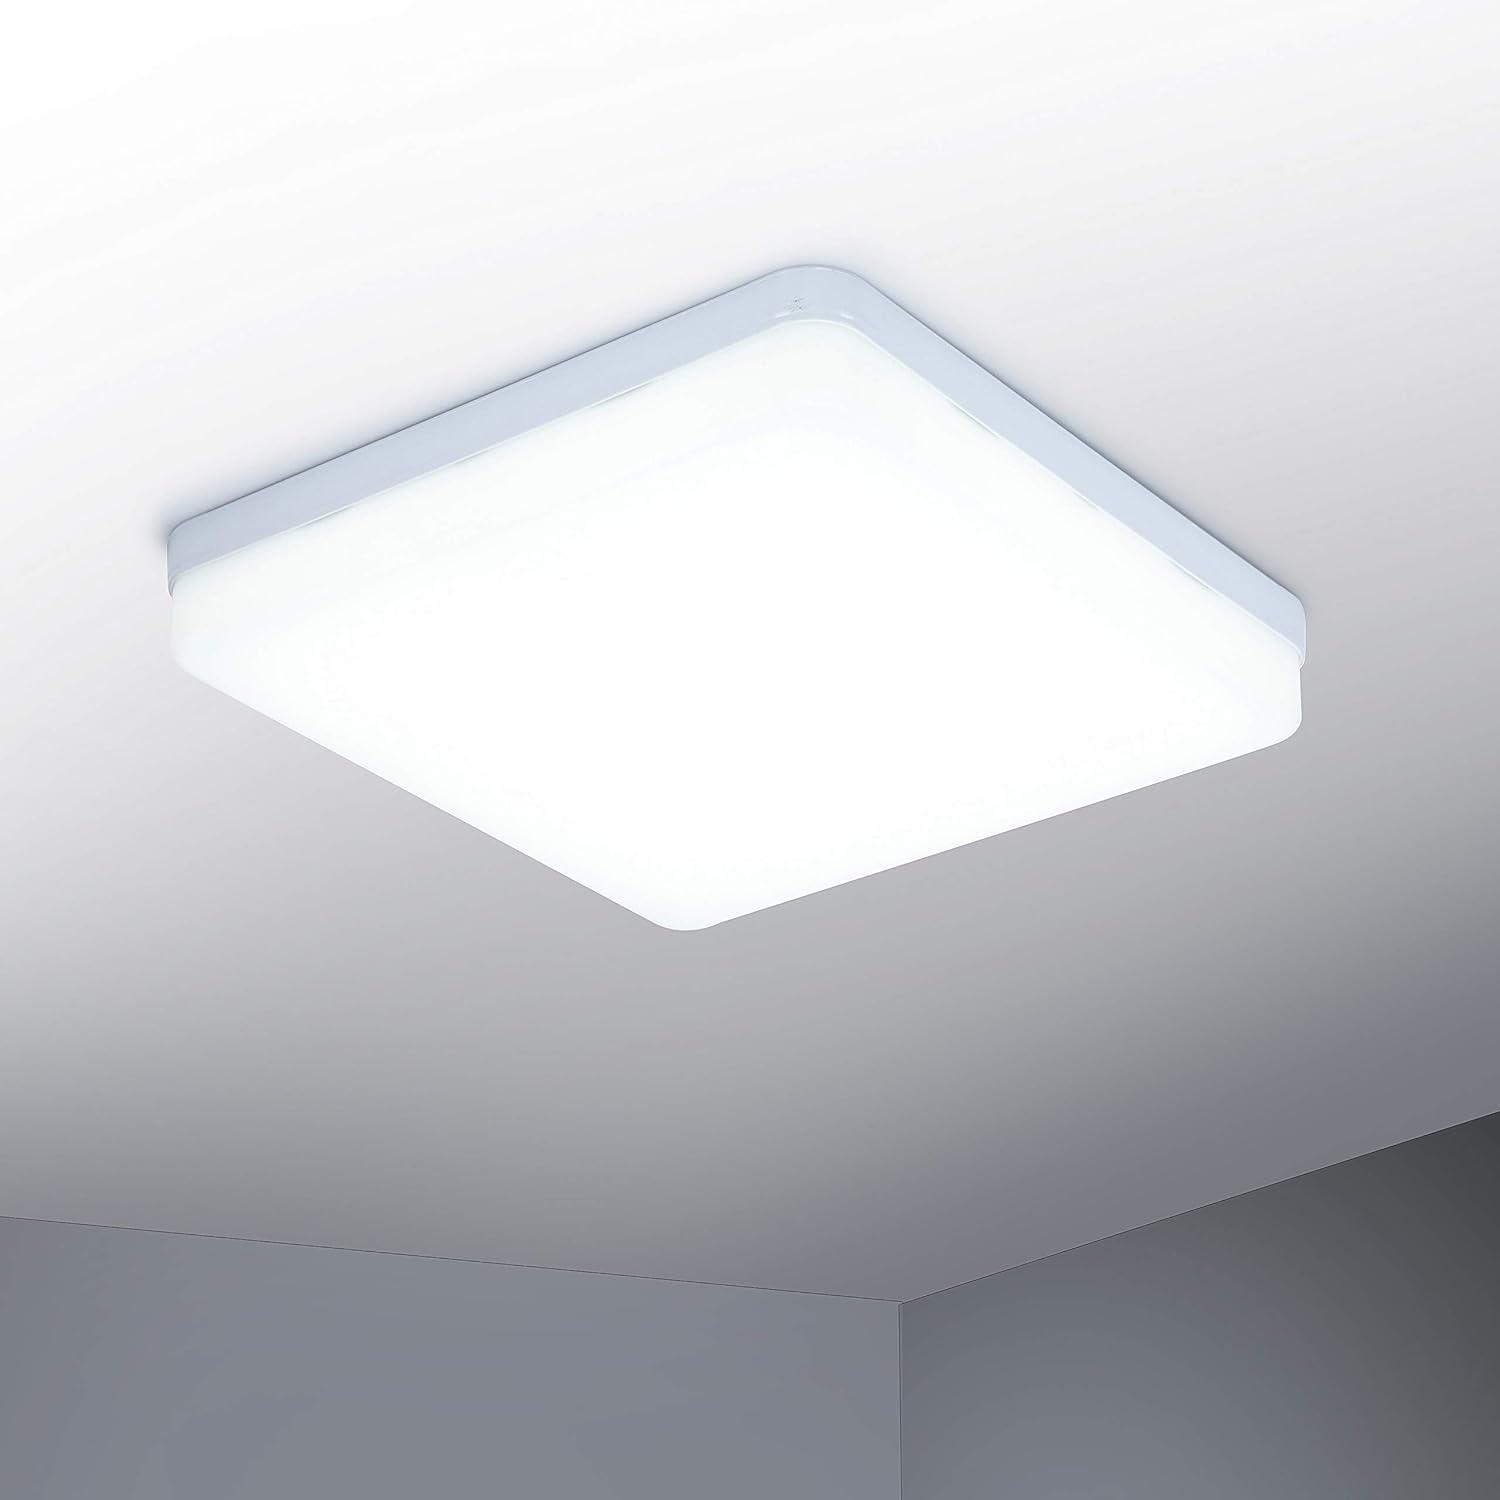 Ceiling Light 36W LED Natural White Square 23cm Indoor Ceiling Lamp - Massive Discounts